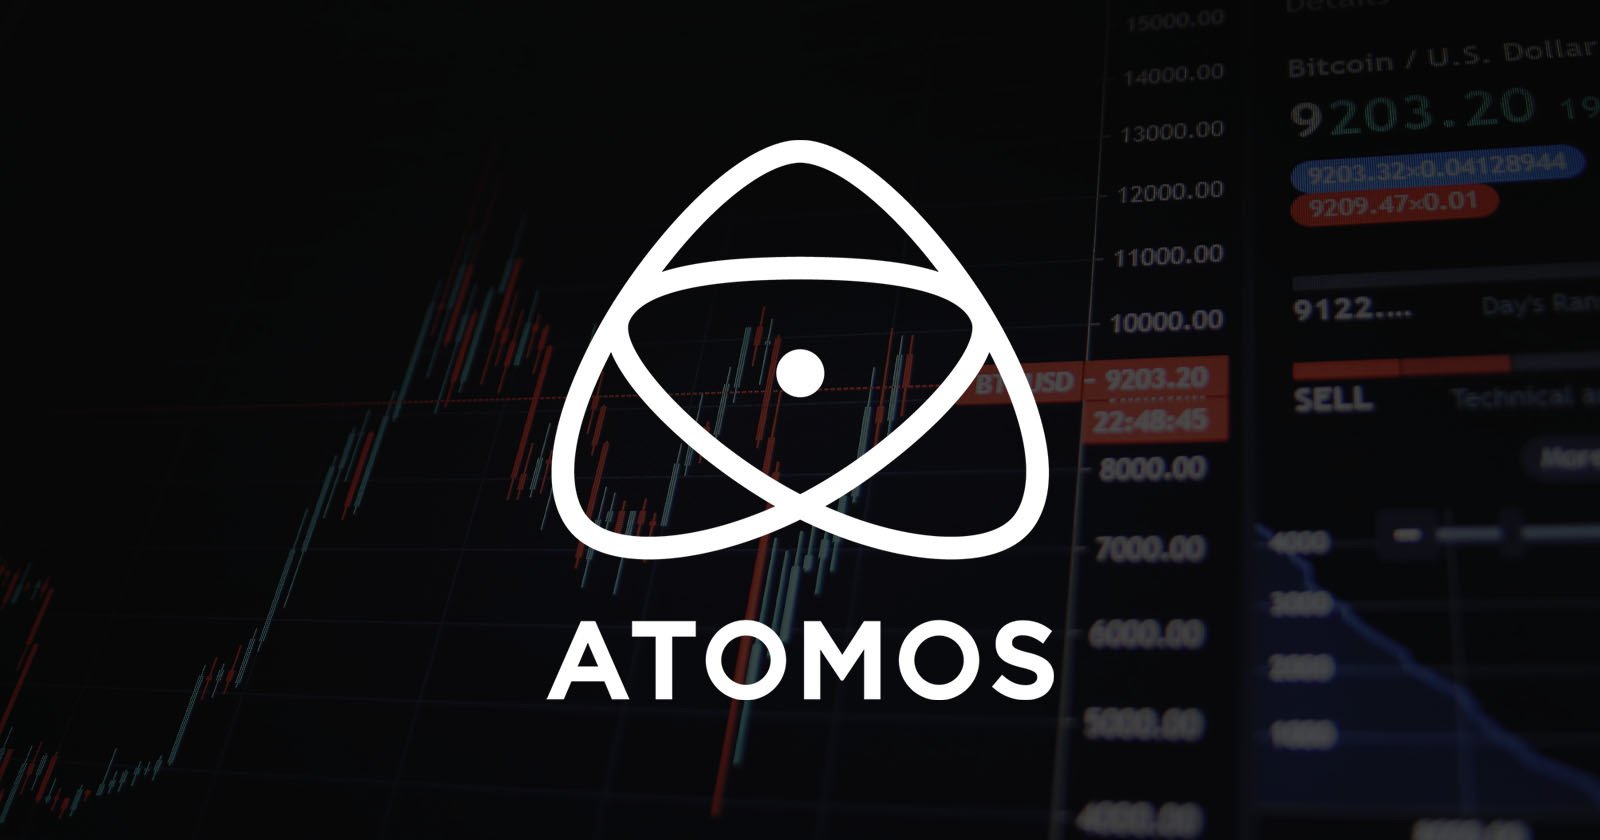 Former Atomos CEO Says She Was Fired for Investigating Securities Fraud